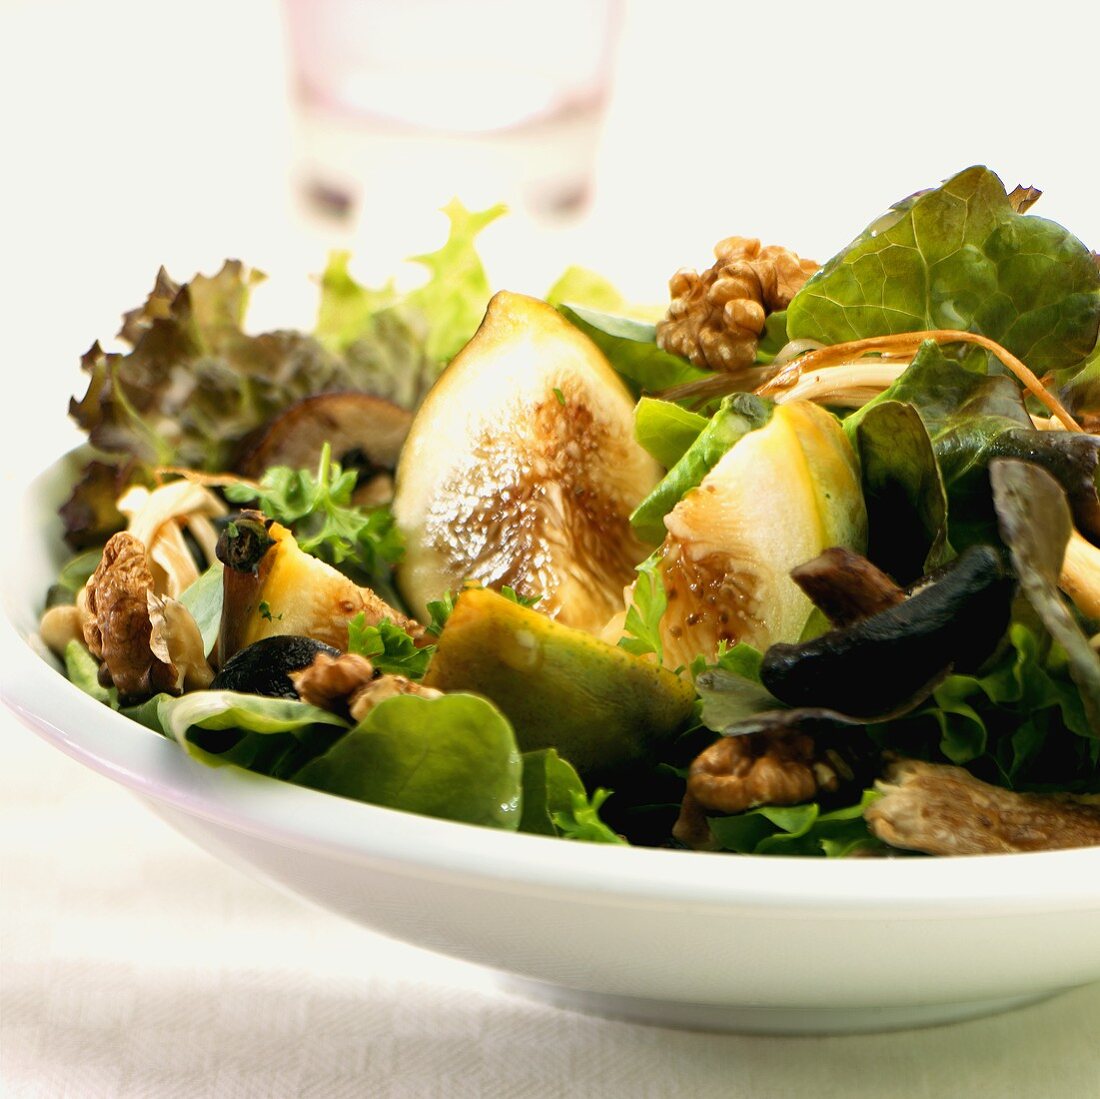 Salad leaves with figs and walnuts (autumnal)